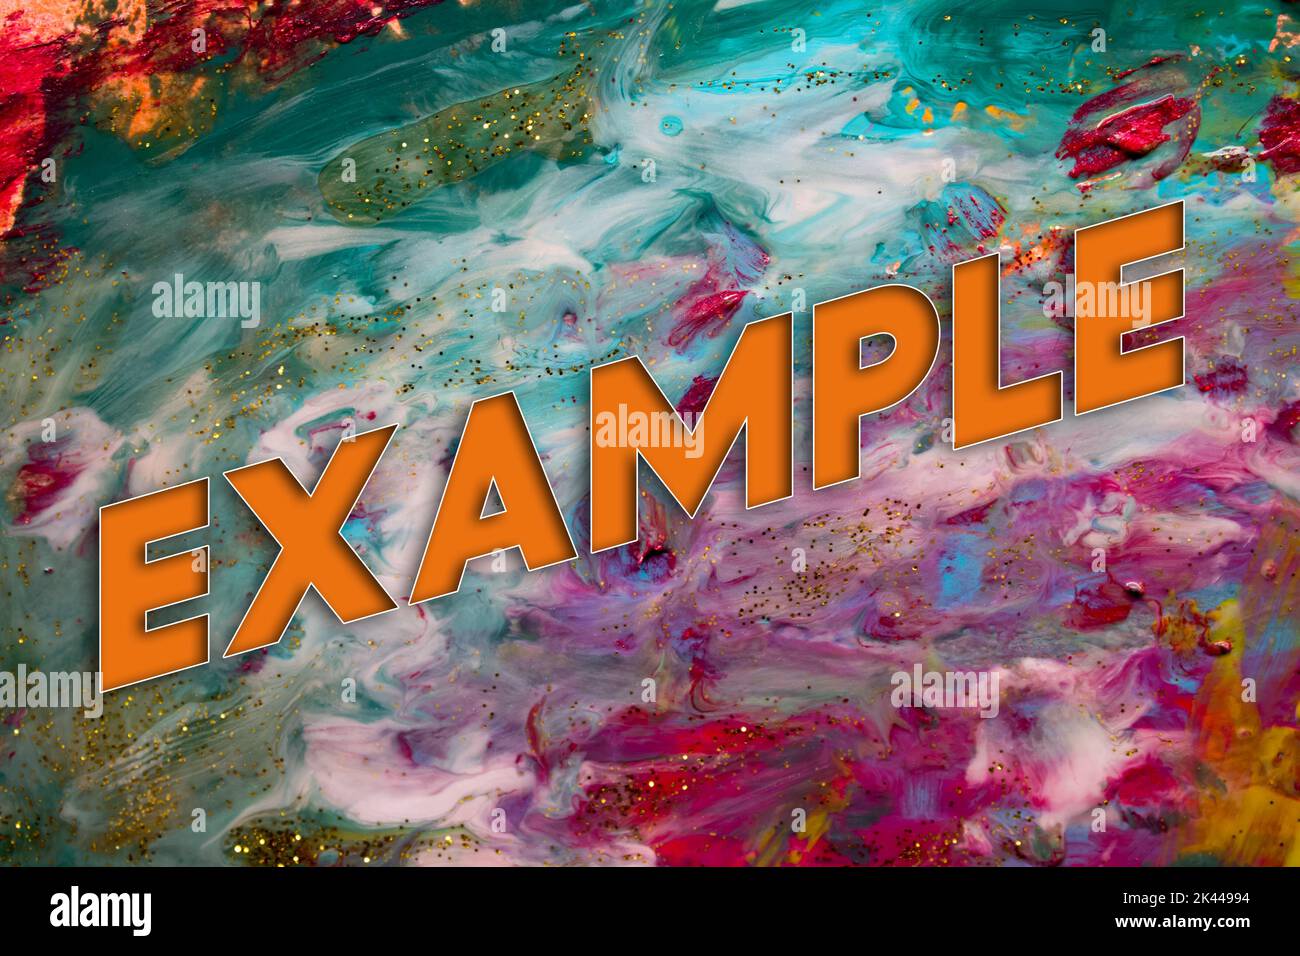 Abstract Natural Luxury art, fluid painting with Example text, alcohol ink technique. Image incorporates the swirls of marble granite. Stock Photo